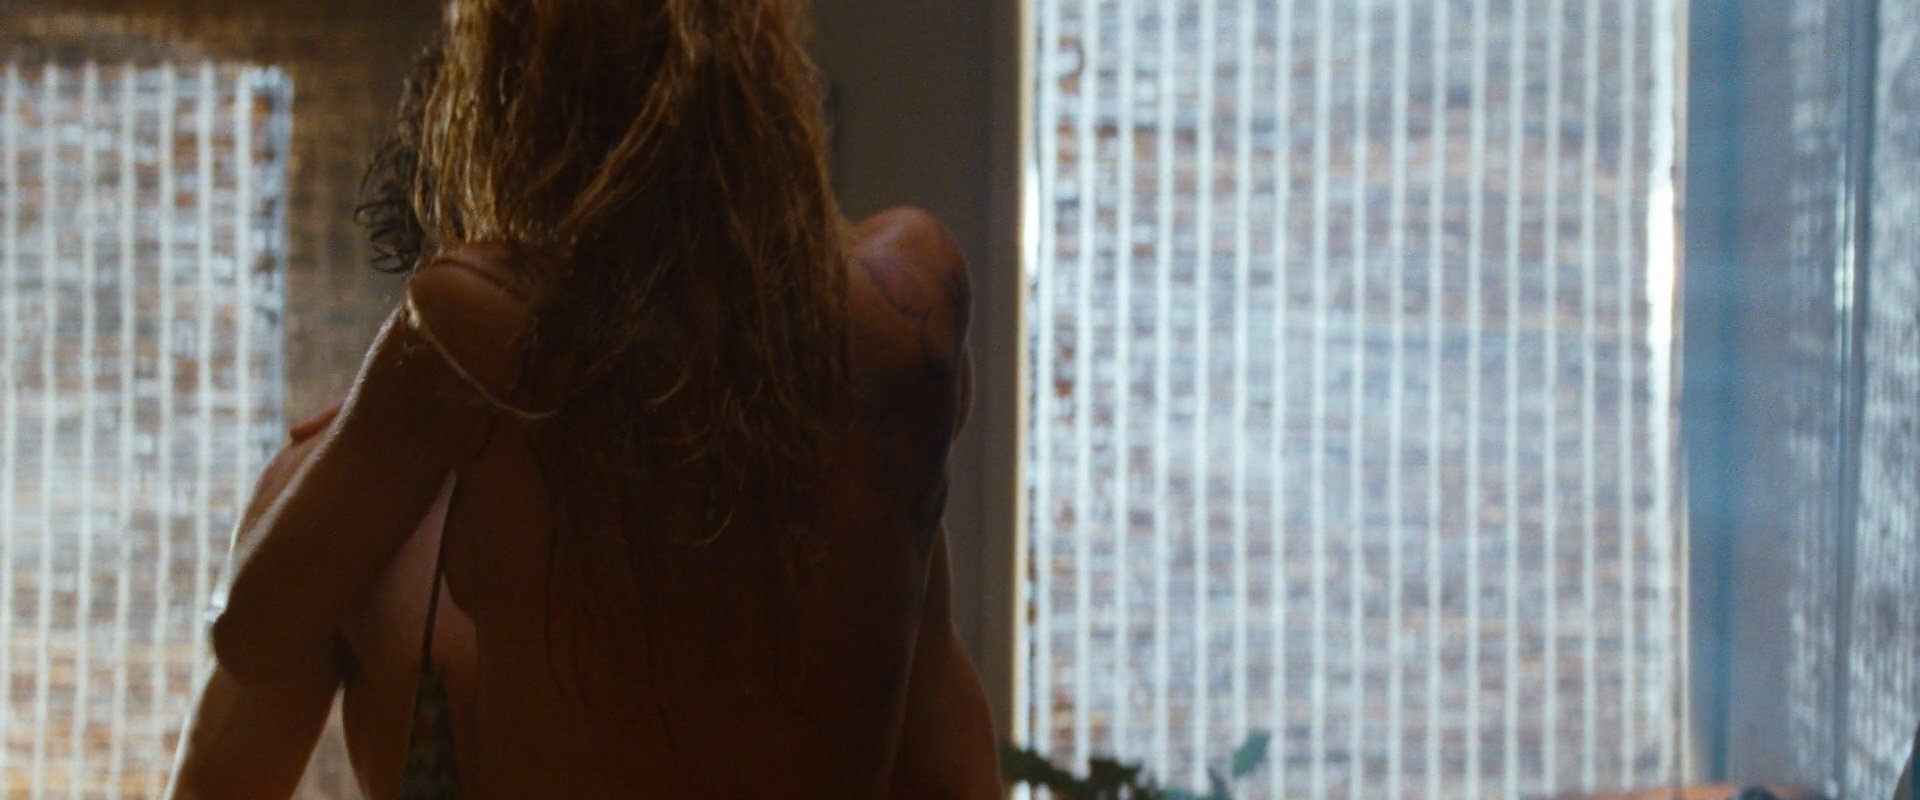 Naked Blake Lively In Savages